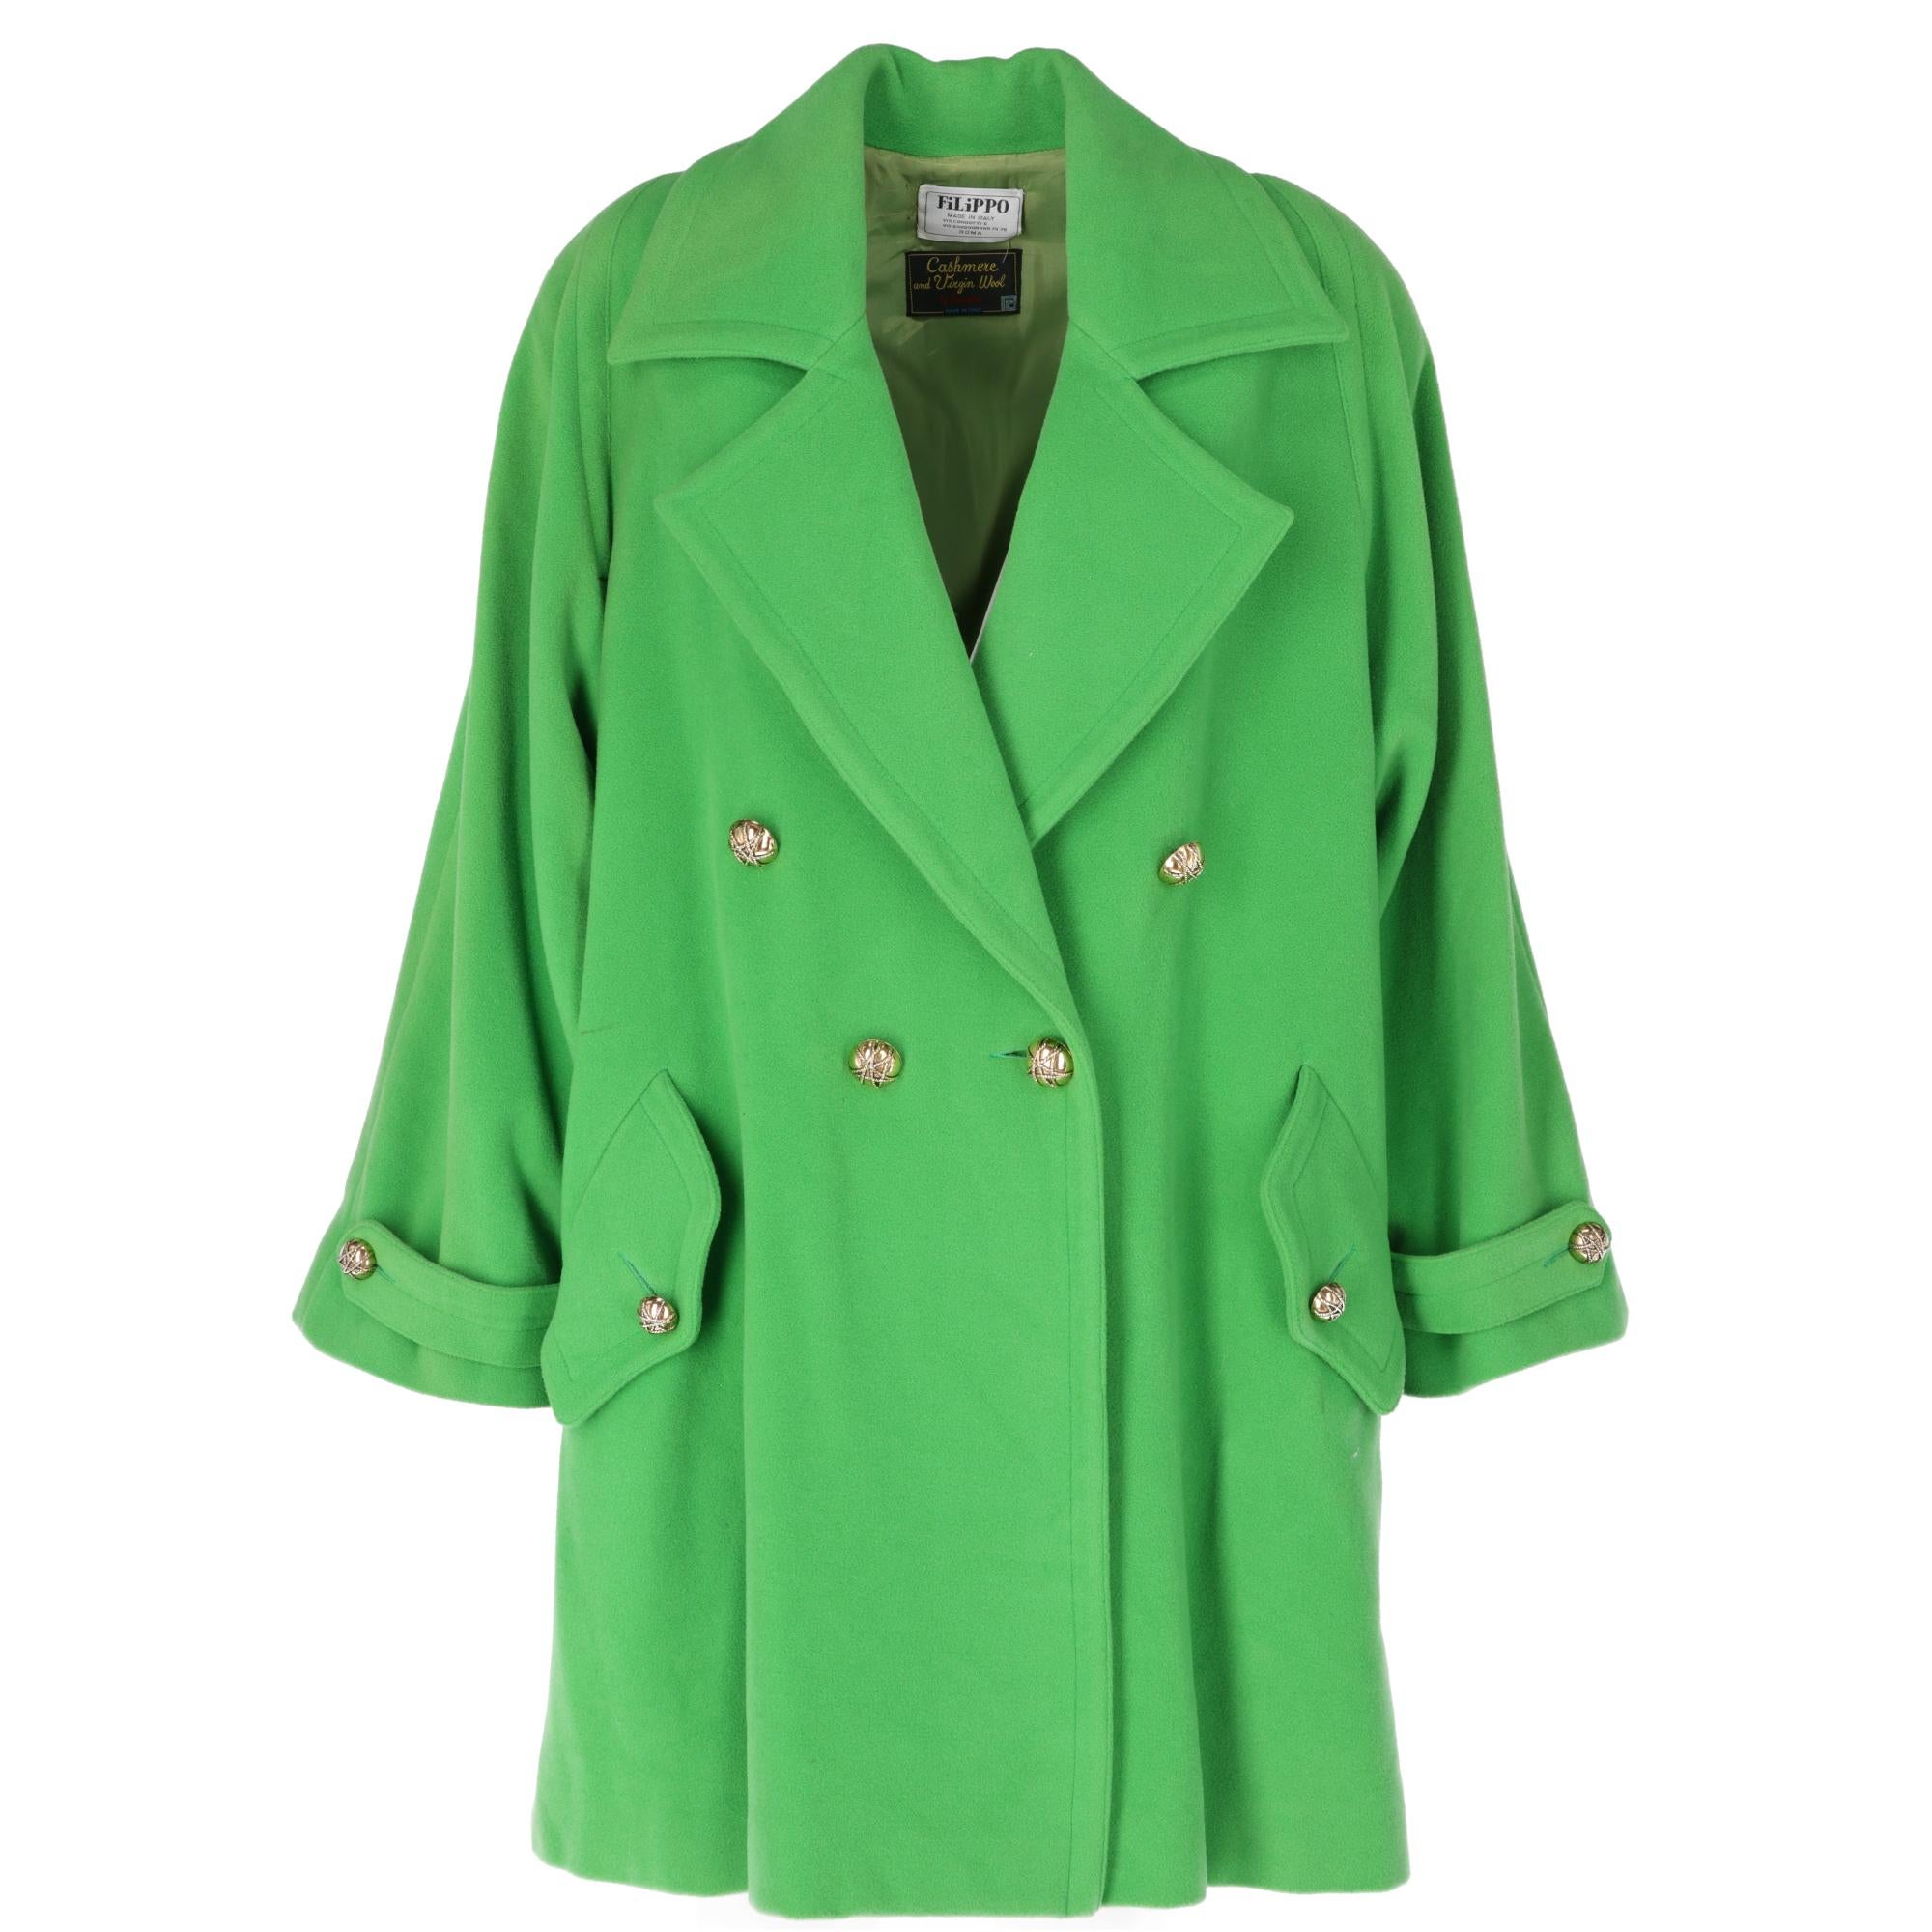 Grass-green coat with classic lapels collar, double-breasted front closure with golden hemispherical buttons, padded shoulders, long sleeves with buckle and button, two side pockets with flap and button, belt, rainproof cape on the back and slit.